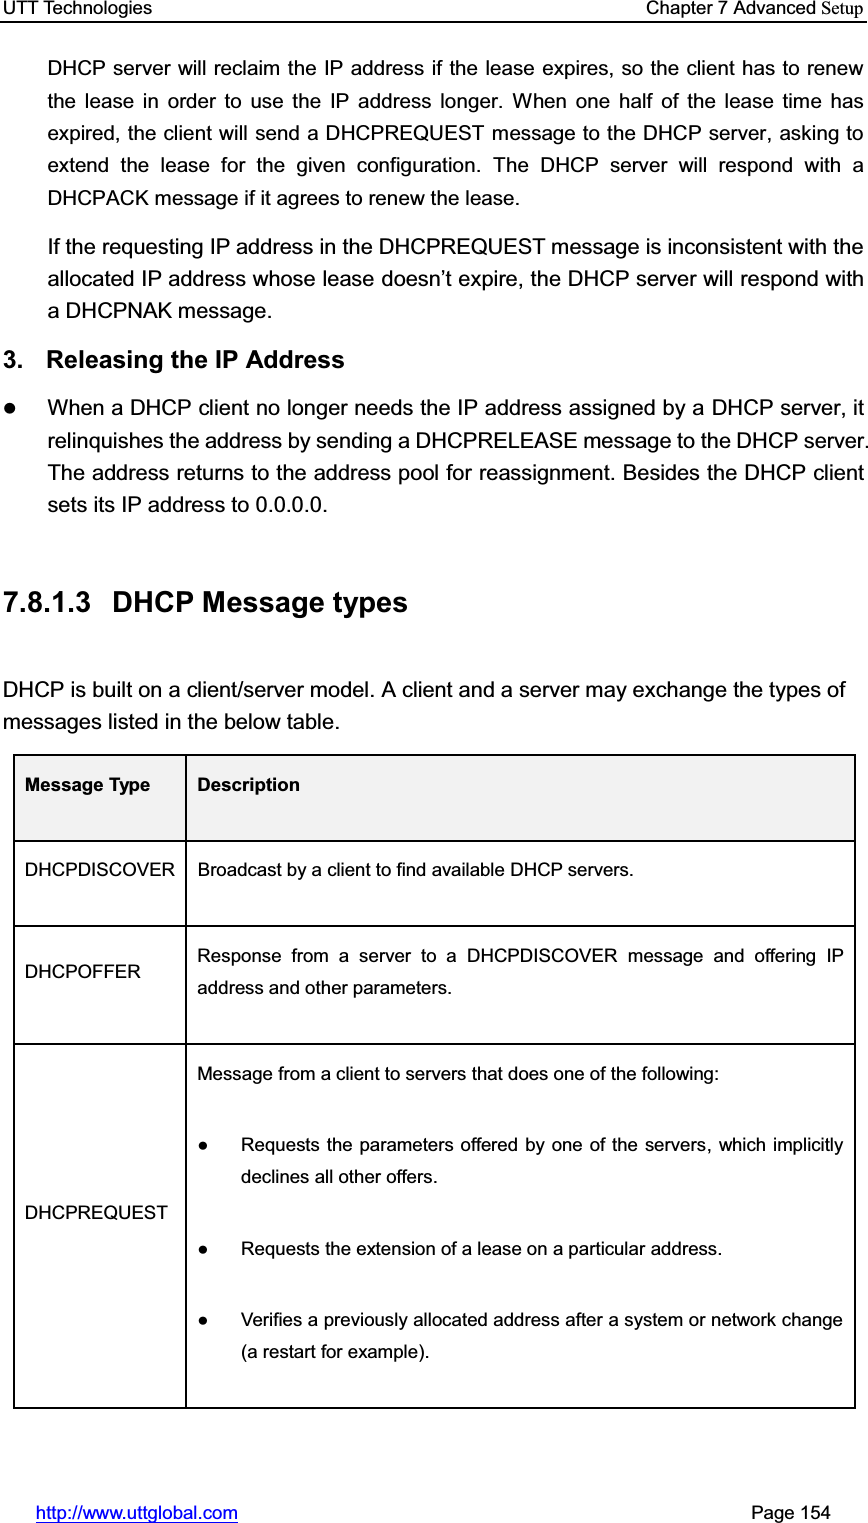 UTT Technologies    Chapter 7 Advanced Setuphttp://www.uttglobal.com                                                       Page 154 DHCP server will reclaim the IP address if the lease expires, so the client has to renew the lease in order to use the IP address longer. When one half of the lease time has expired, the client will send a DHCPREQUEST message to the DHCP server, asking to extend the lease for the given configuration. The DHCP server will respond with a DHCPACK message if it agrees to renew the lease. If the requesting IP address in the DHCPREQUEST message is inconsistent with the allocated IP address whose lease GRHVQ¶W expire, the DHCP server will respond with a DHCPNAK message. 3. Releasing the IP Address zWhen a DHCP client no longer needs the IP address assigned by a DHCP server, it relinquishes the address by sending a DHCPRELEASE message to the DHCP server. The address returns to the address pool for reassignment. Besides the DHCP client sets its IP address to 0.0.0.0. 7.8.1.3 DHCP Message types DHCP is built on a client/server model. A client and a server may exchange the types of messages listed in the below table. Message Type  DescriptionDHCPDISCOVER  Broadcast by a client to find available DHCP servers. DHCPOFFER  Response from a server to a DHCPDISCOVER message and offering IP address and other parameters. DHCPREQUEST Message from a client to servers that does one of the following: Ɣ  Requests the parameters offered by one of the servers, which implicitly declines all other offers. Ɣ  Requests the extension of a lease on a particular address. Ɣ  Verifies a previously allocated address after a system or network change(a restart for example). 